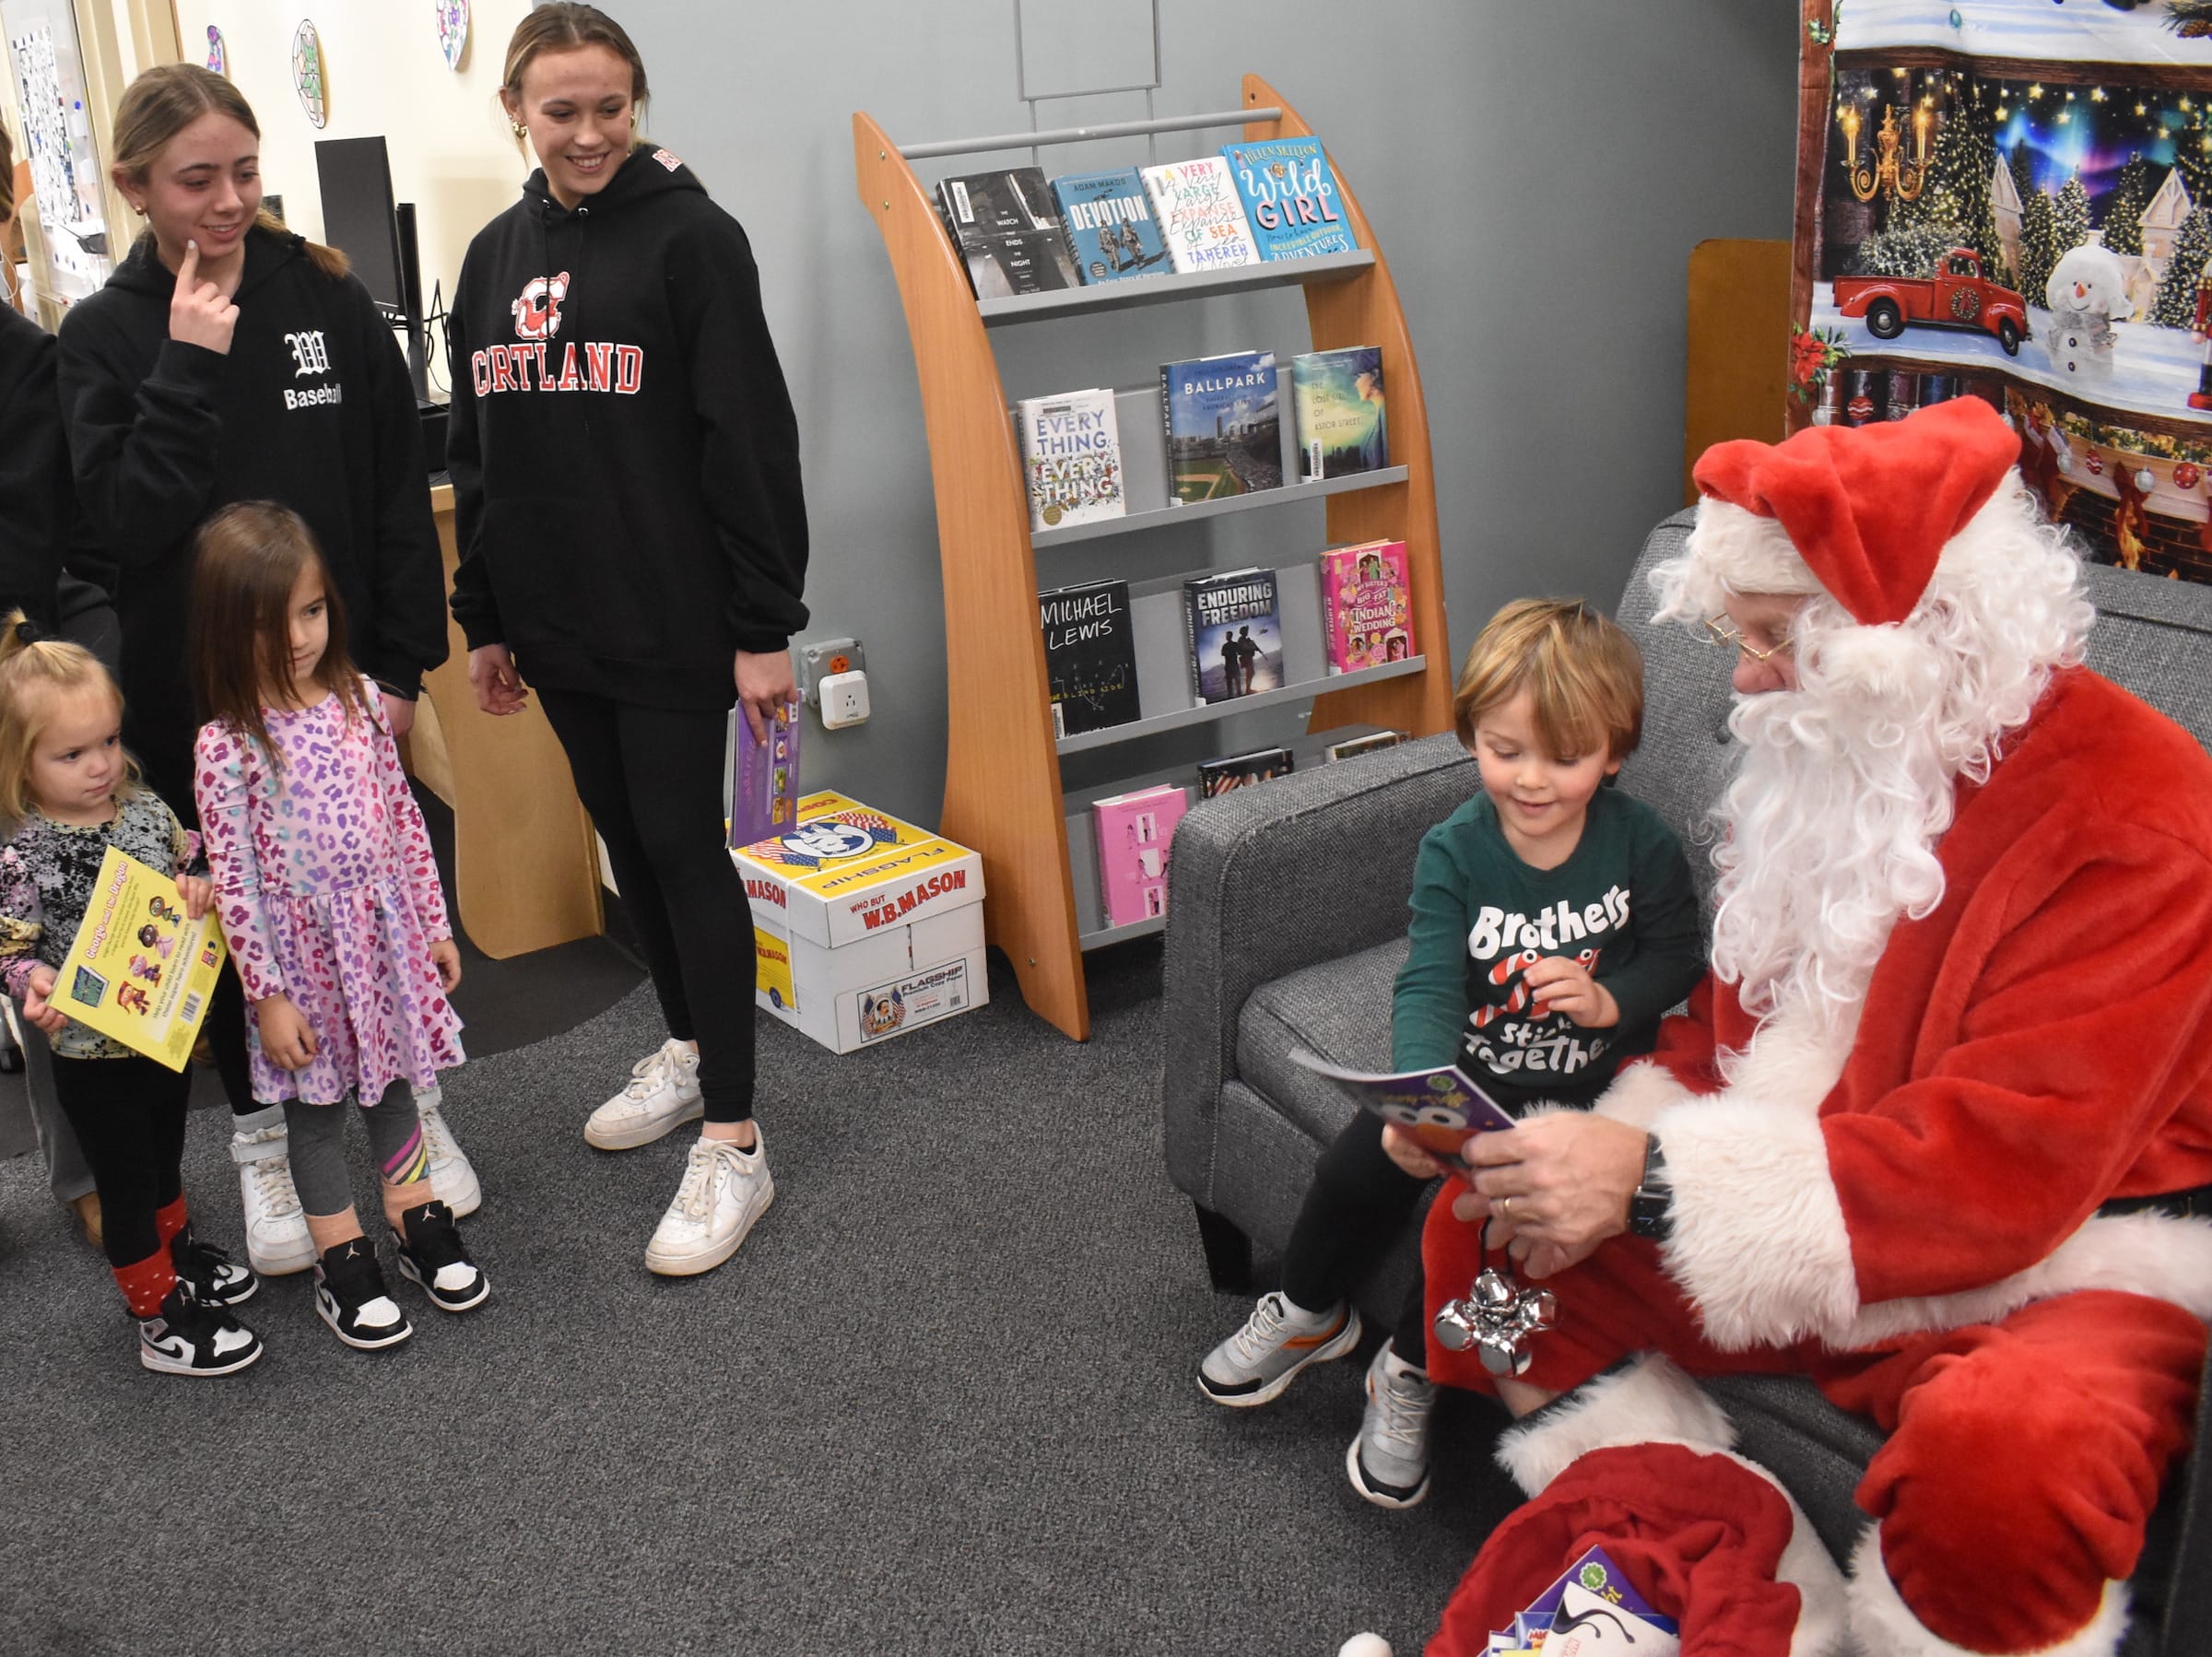 Wantagh High School Play Group Adds Some Holiday Flair